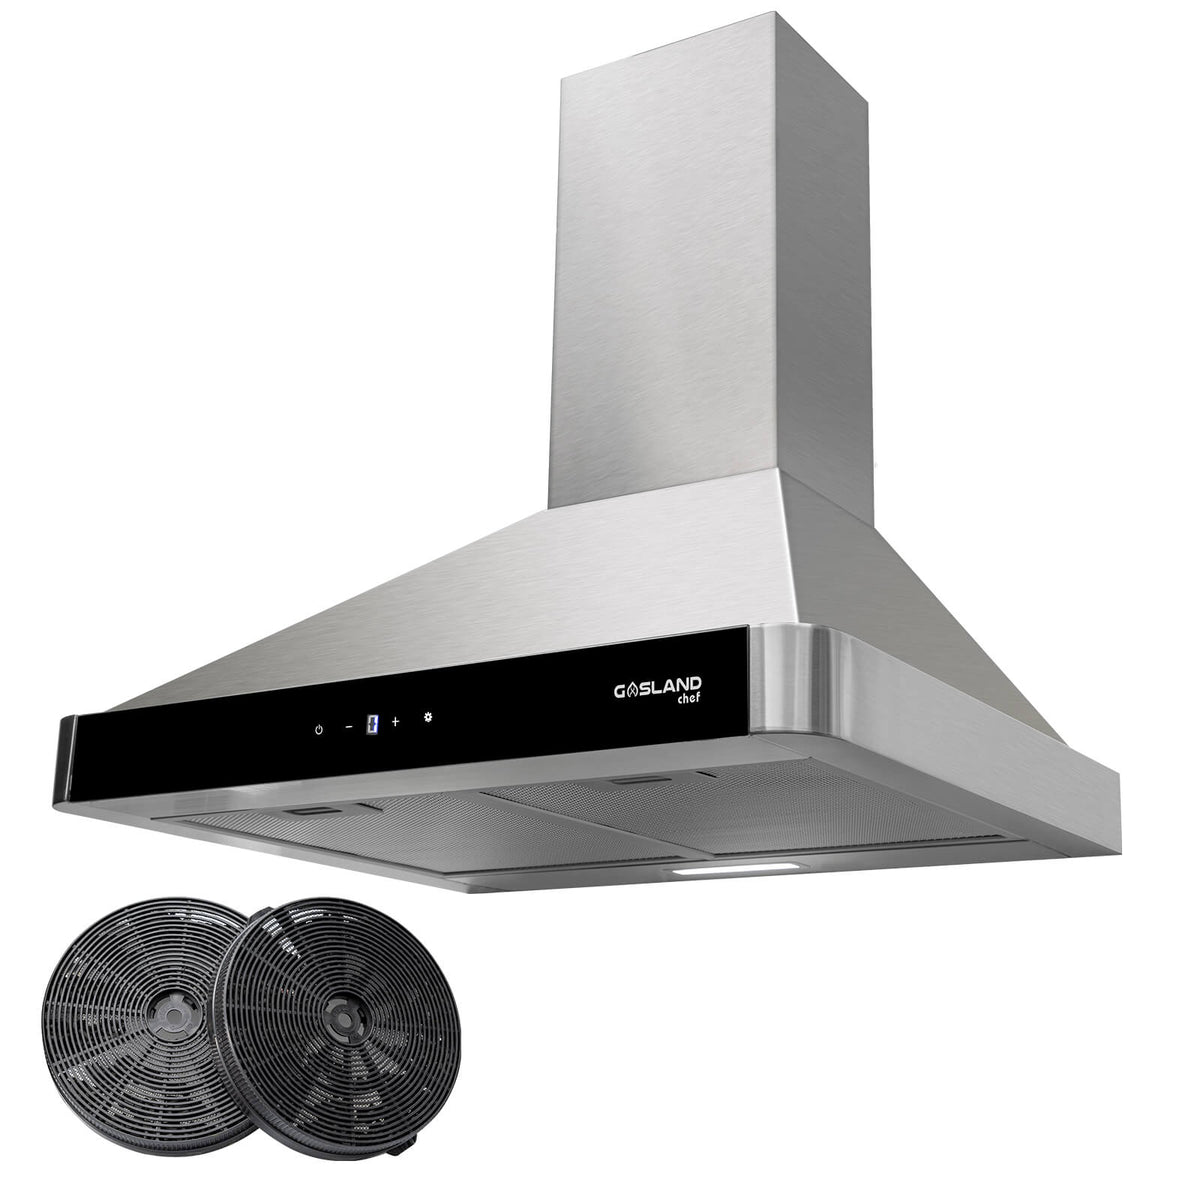 GASLAND Chef PR60SS Cooker Hood 60cm Recirculation, Quiet Cooker Hood Exhaust 488 m³/h Activated Carbon Filter, 3 Level Touch Control Wall Mounted Hood with Filter, Stainless Steel Silver Glass Screens [Energy Class B]